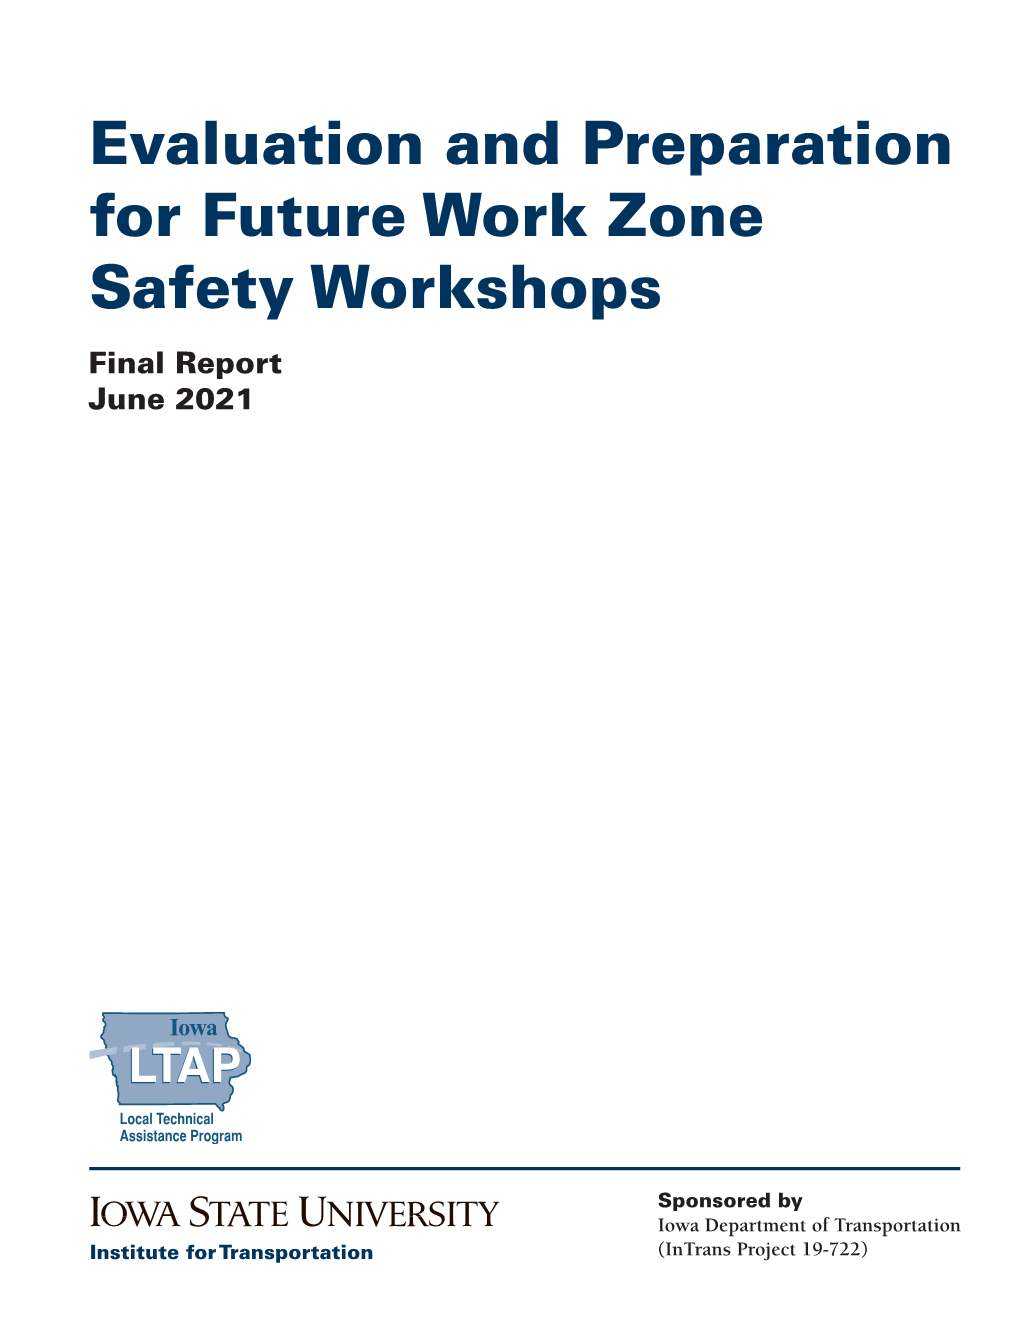 Evaluation and Preparation for Future Work Zone Safety Workshops Final Report June 2021